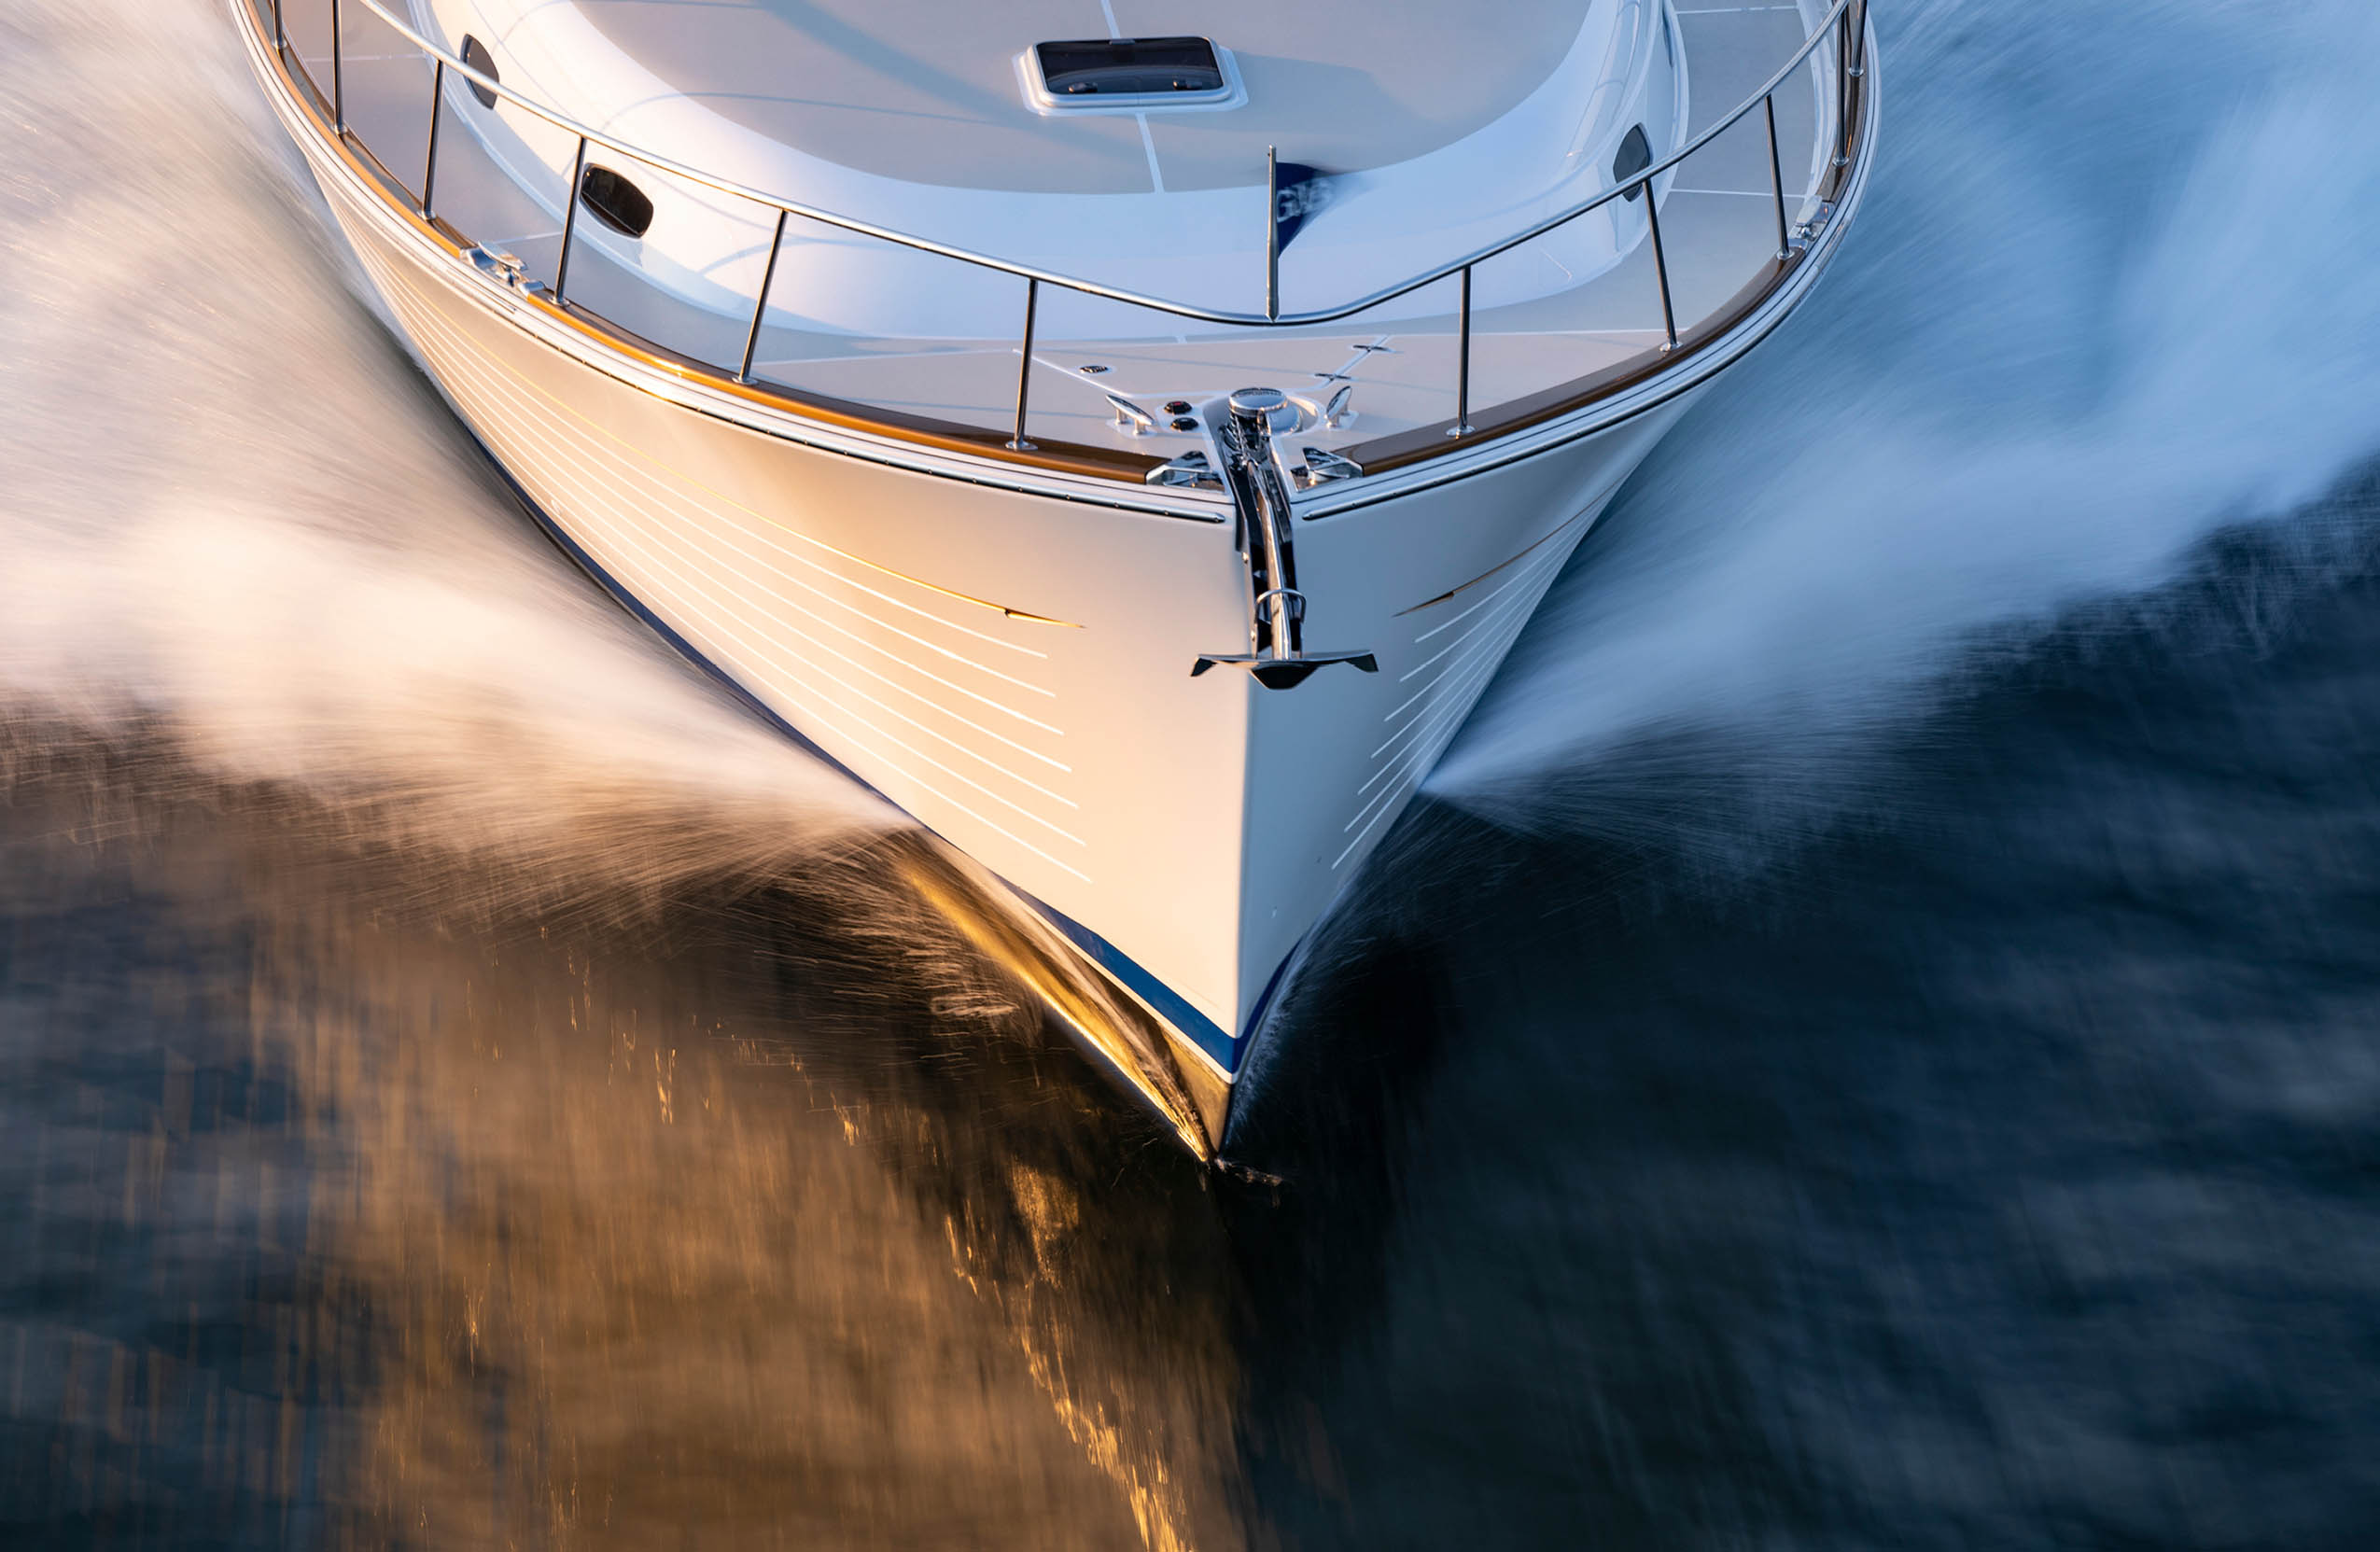 The Grand Banks GB54 exterior